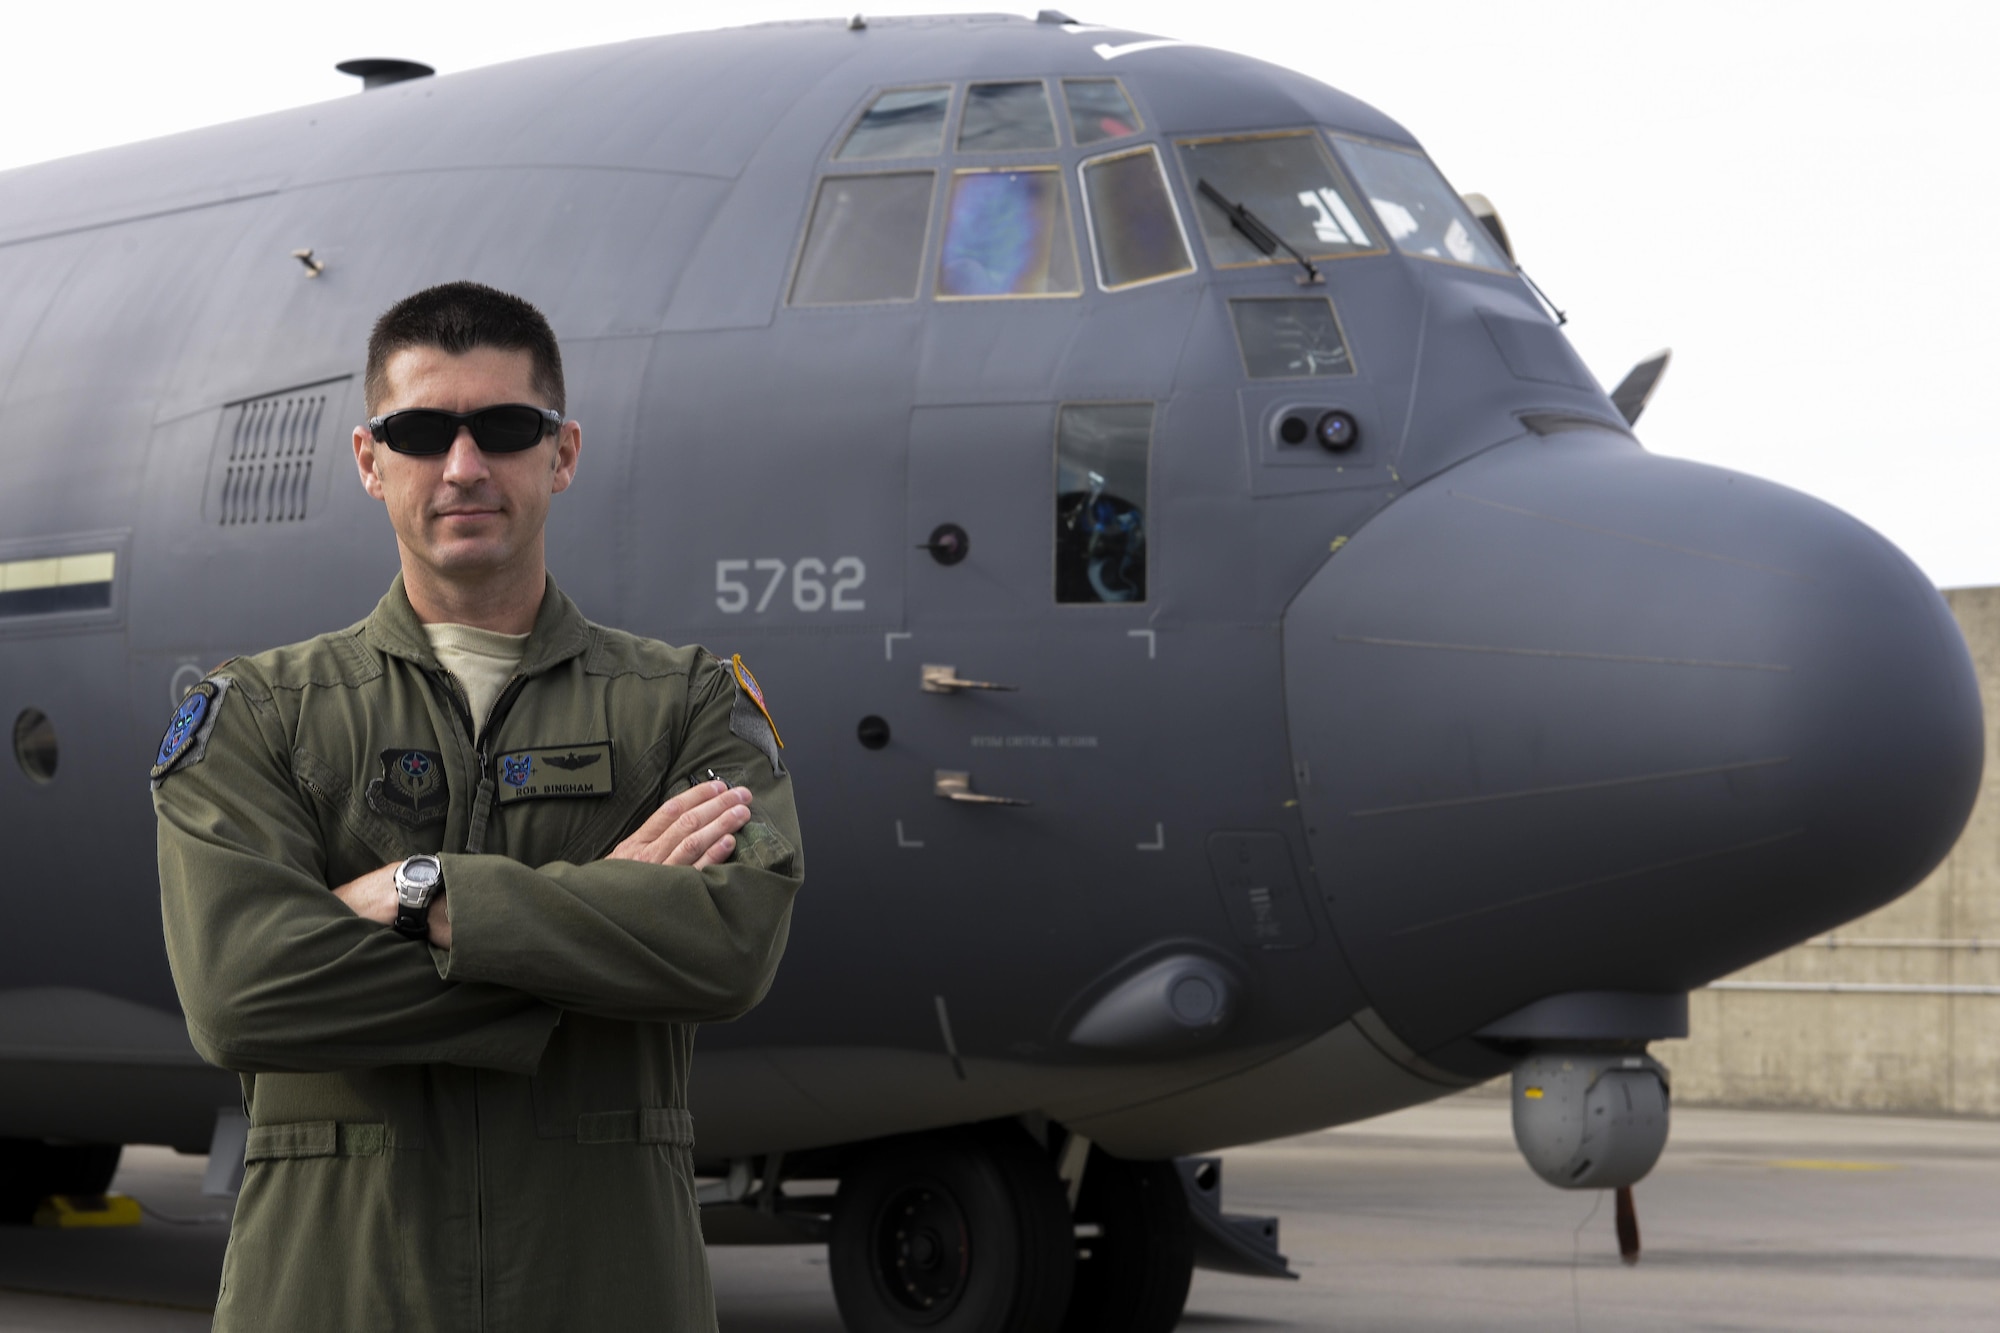 U.S. Air Force Maj. Robert Bingham, 17th Special Operations Squadron Standards and Evaluation chief, poses for a photo in front of a MC-130J Commando II Sept. 10, 2015, on Kadena Air Base, Japan. Bingham was selected to receive the Airlift/Tanker Association Award for his outstanding performance in air mobility activities. (U.S. Air Force photo by Senior Airman John Linzmeier)